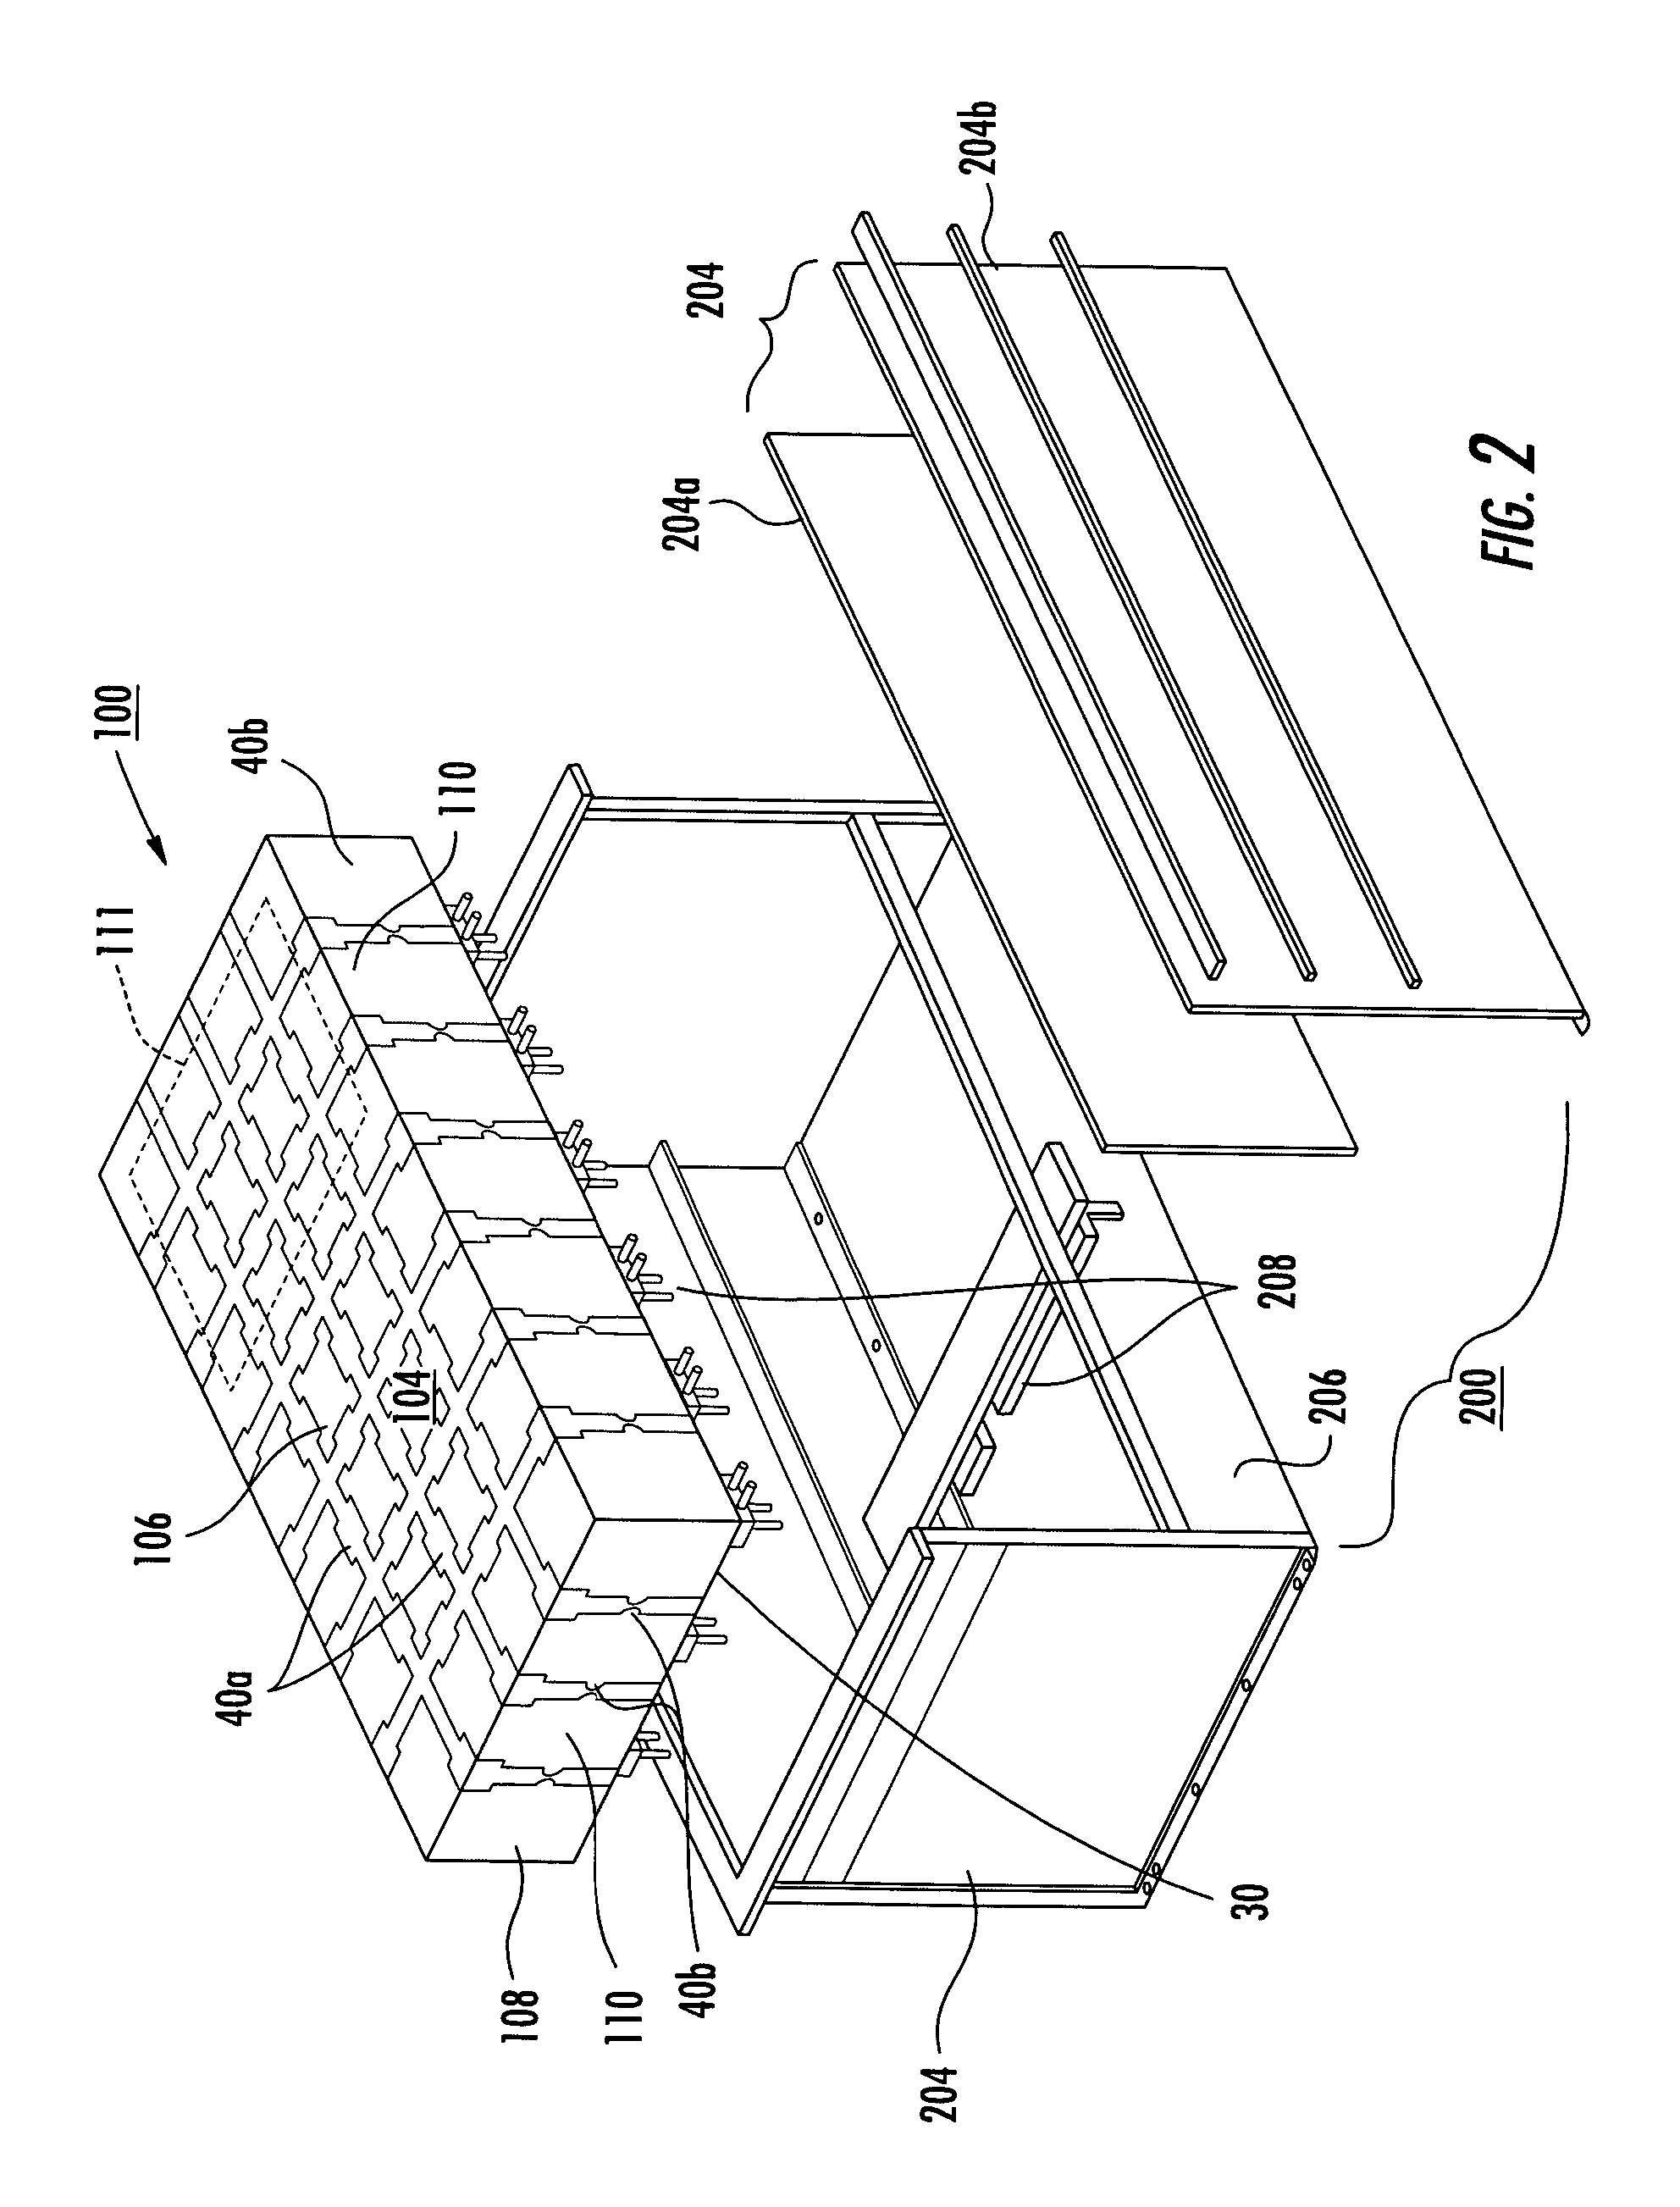 Phased array antenna absorber and associated methods